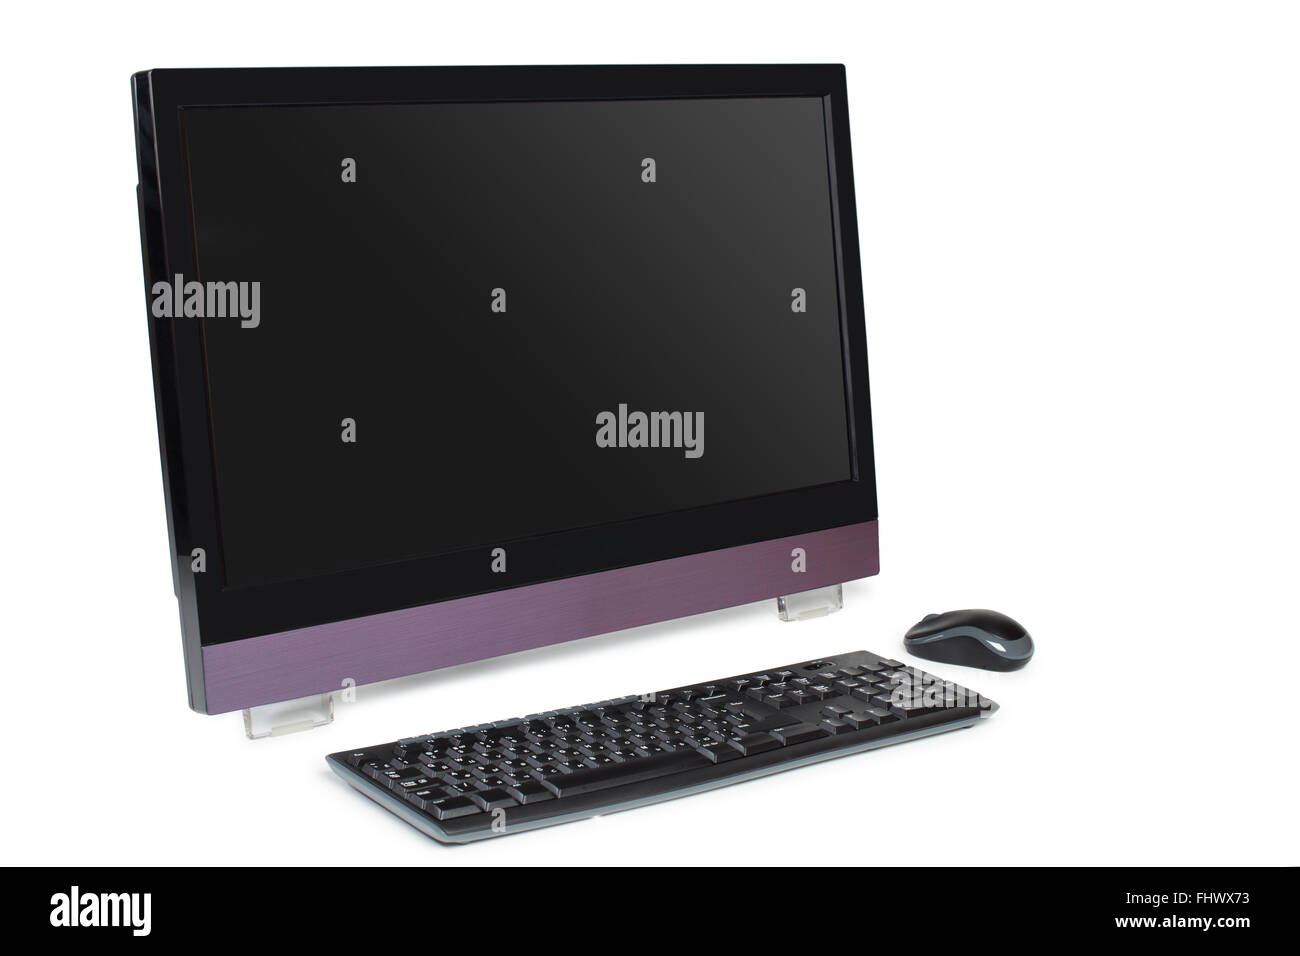 Modern all in one desktop computer with touchscreen isolated on white with keyboard and mouse Stock Photo